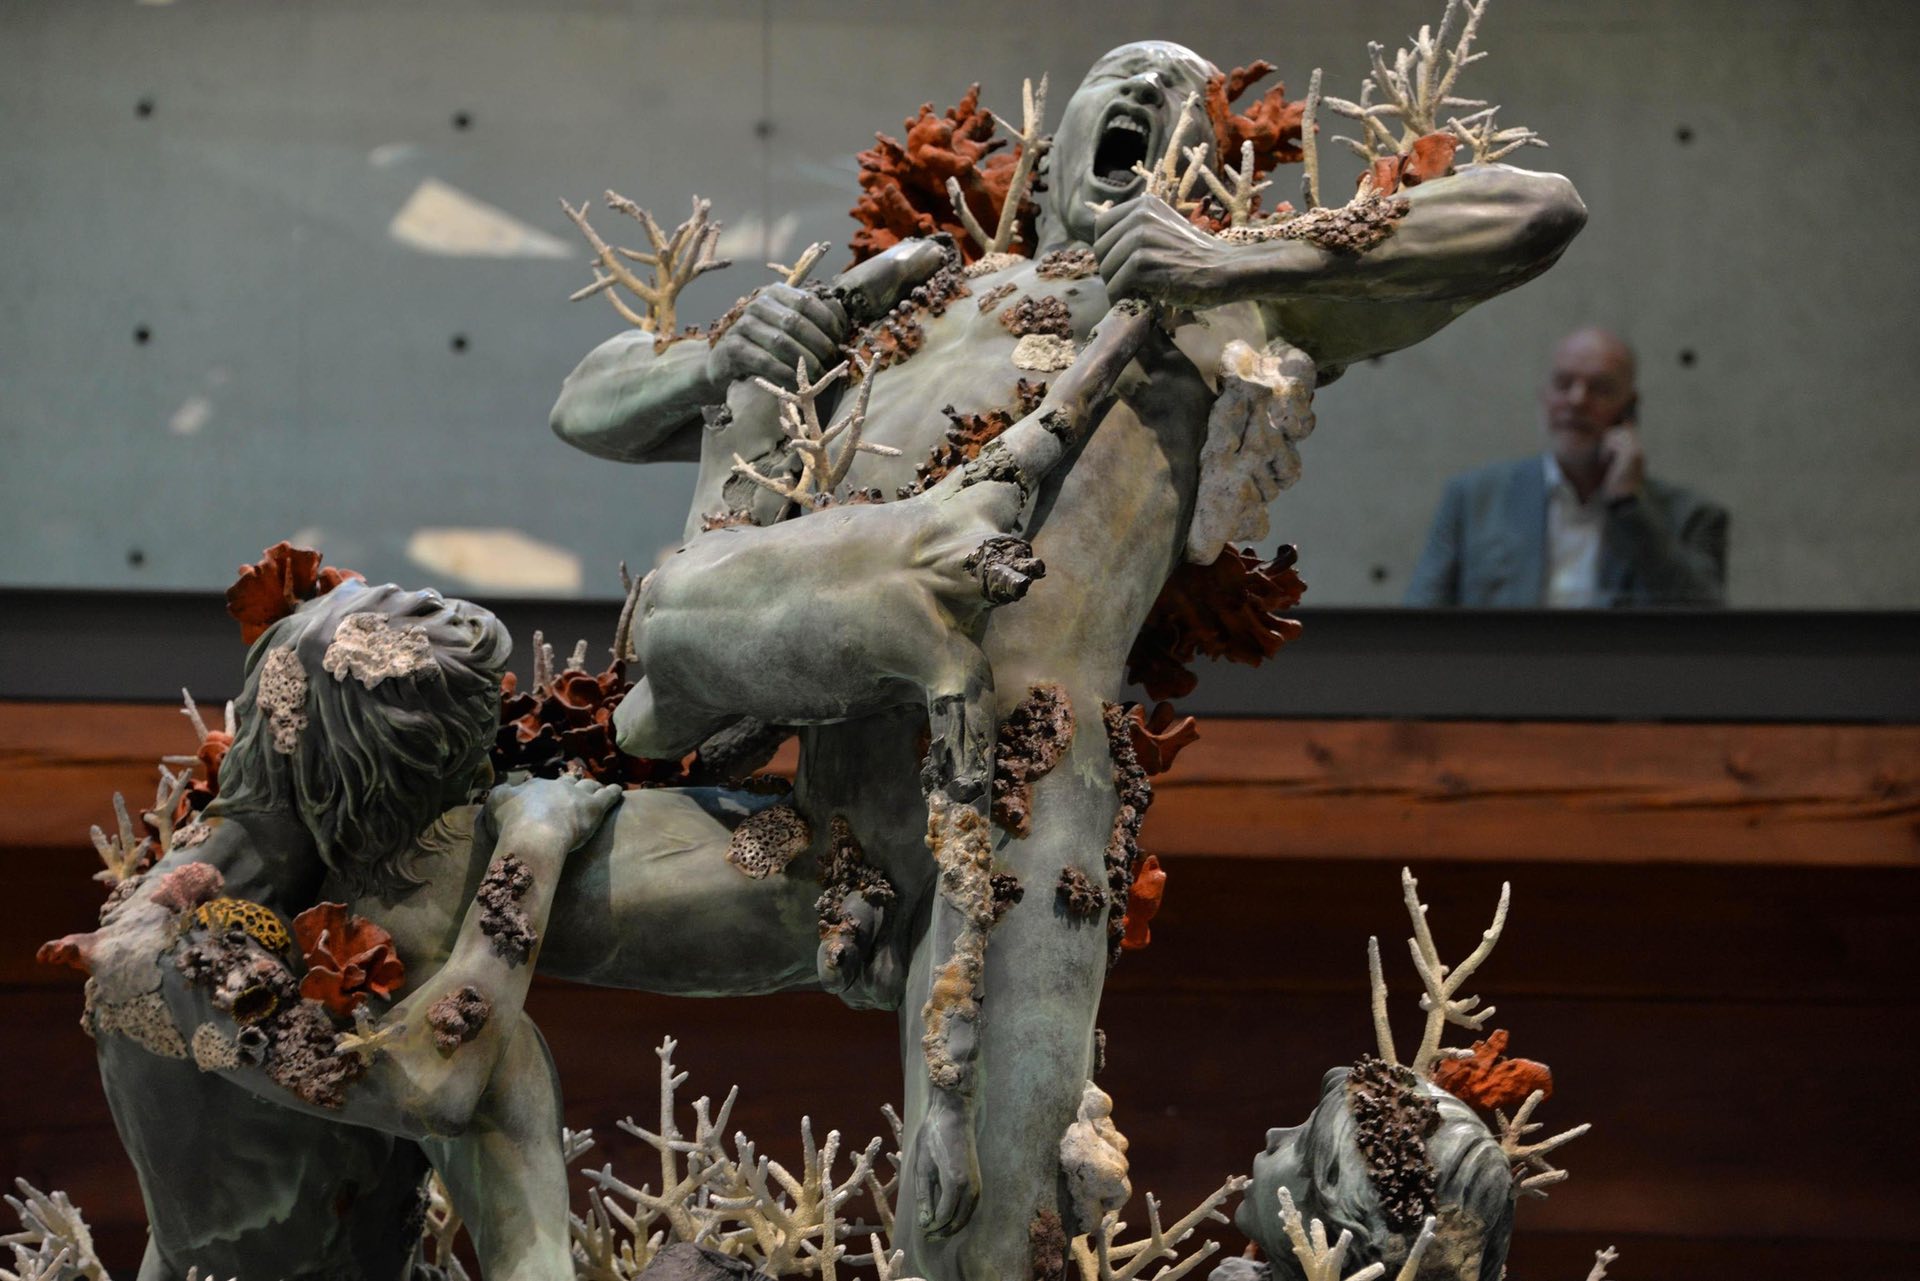 Damien Hirst Cronos Devouring his Children by Damien Hirst, from Treasures from the Wreck of the Unbelievable in Venice. Photograph: Andrea Merola/AP